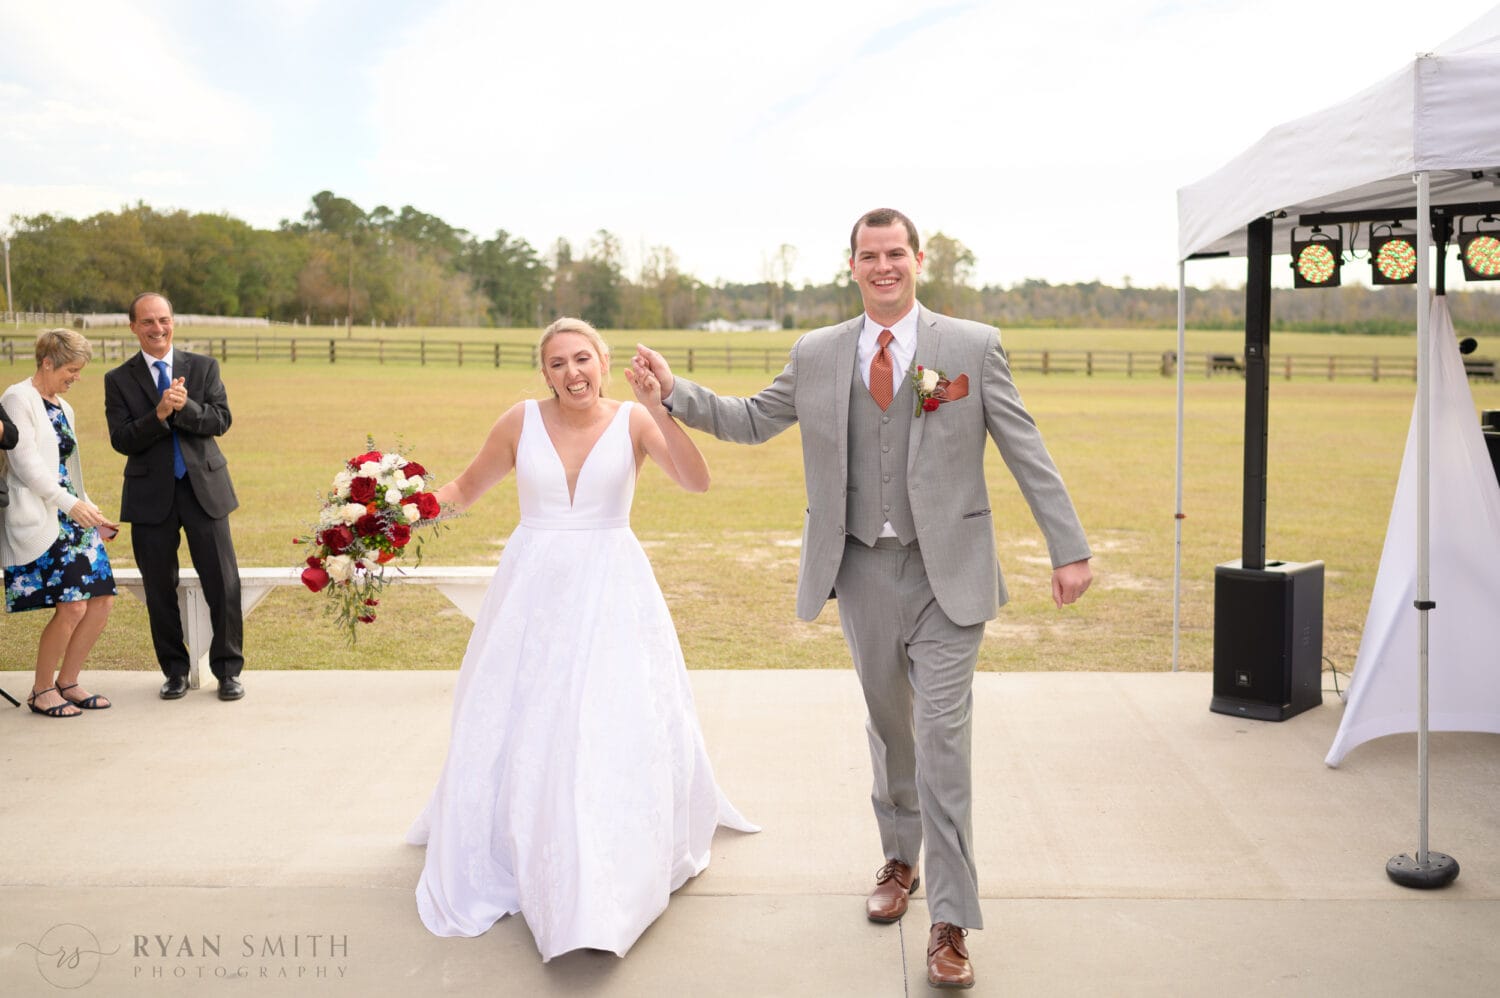 Wedding introductions - The Blessed Barn